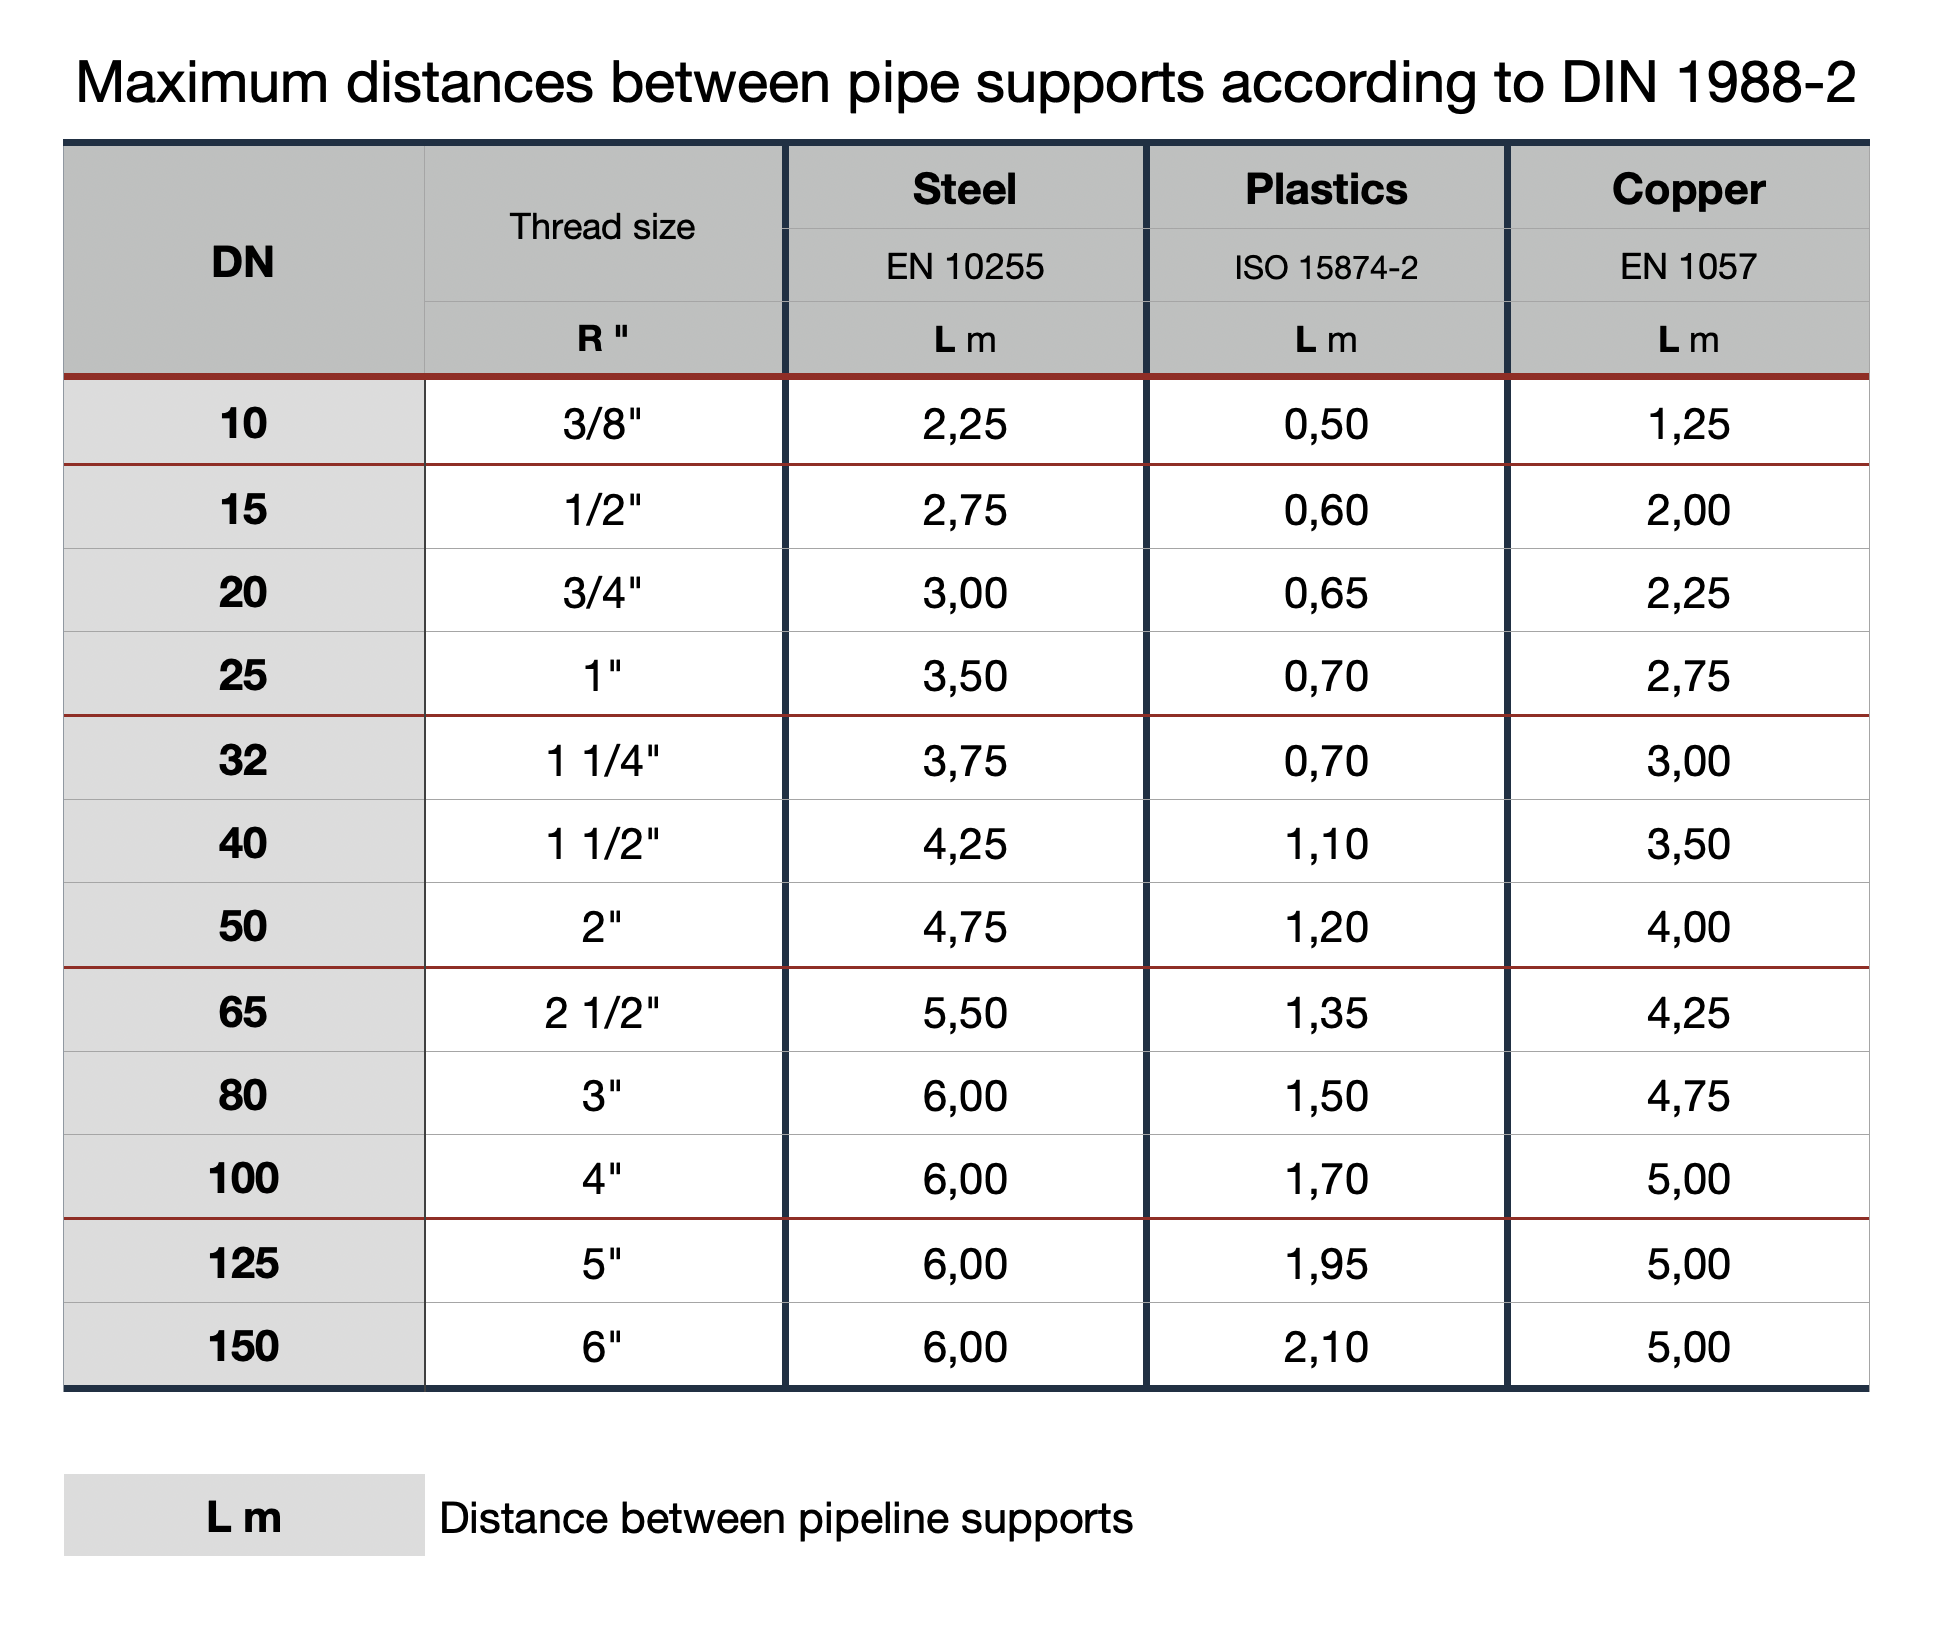 Maximum distances between pipe supports according to DIN 1988-2